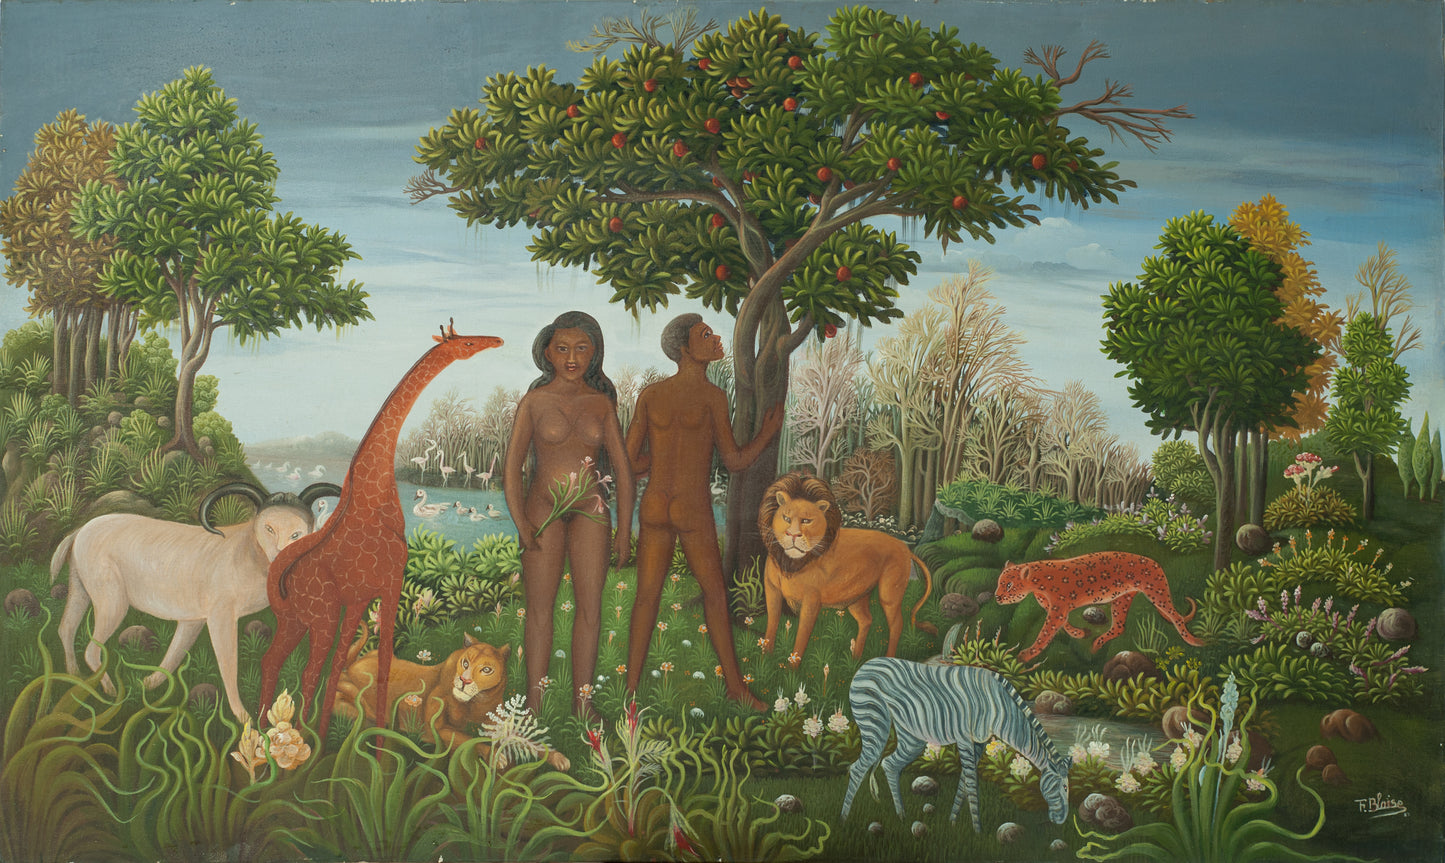 Fabolon Blaise (1959-1985) 36"x60" Adam & Eve Under the Tree c1984 Oil on Canvas Painting #1-3-96GSN-Fondation Marie & Georges S. Nader